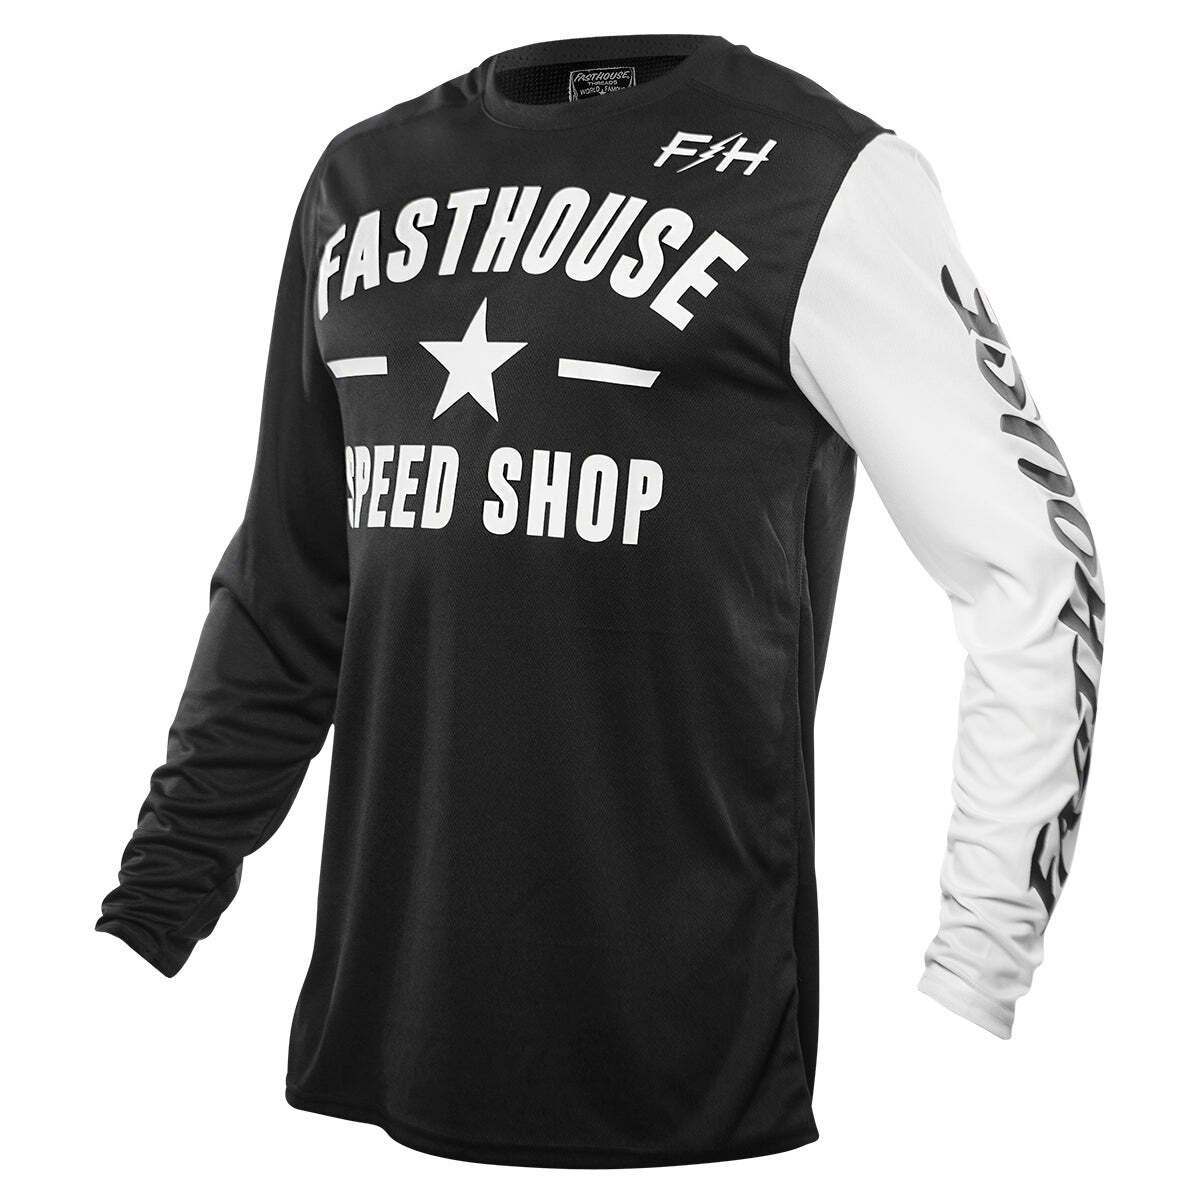 Fasthouse Carbon Jersey - Black/White - FASTHOUSE